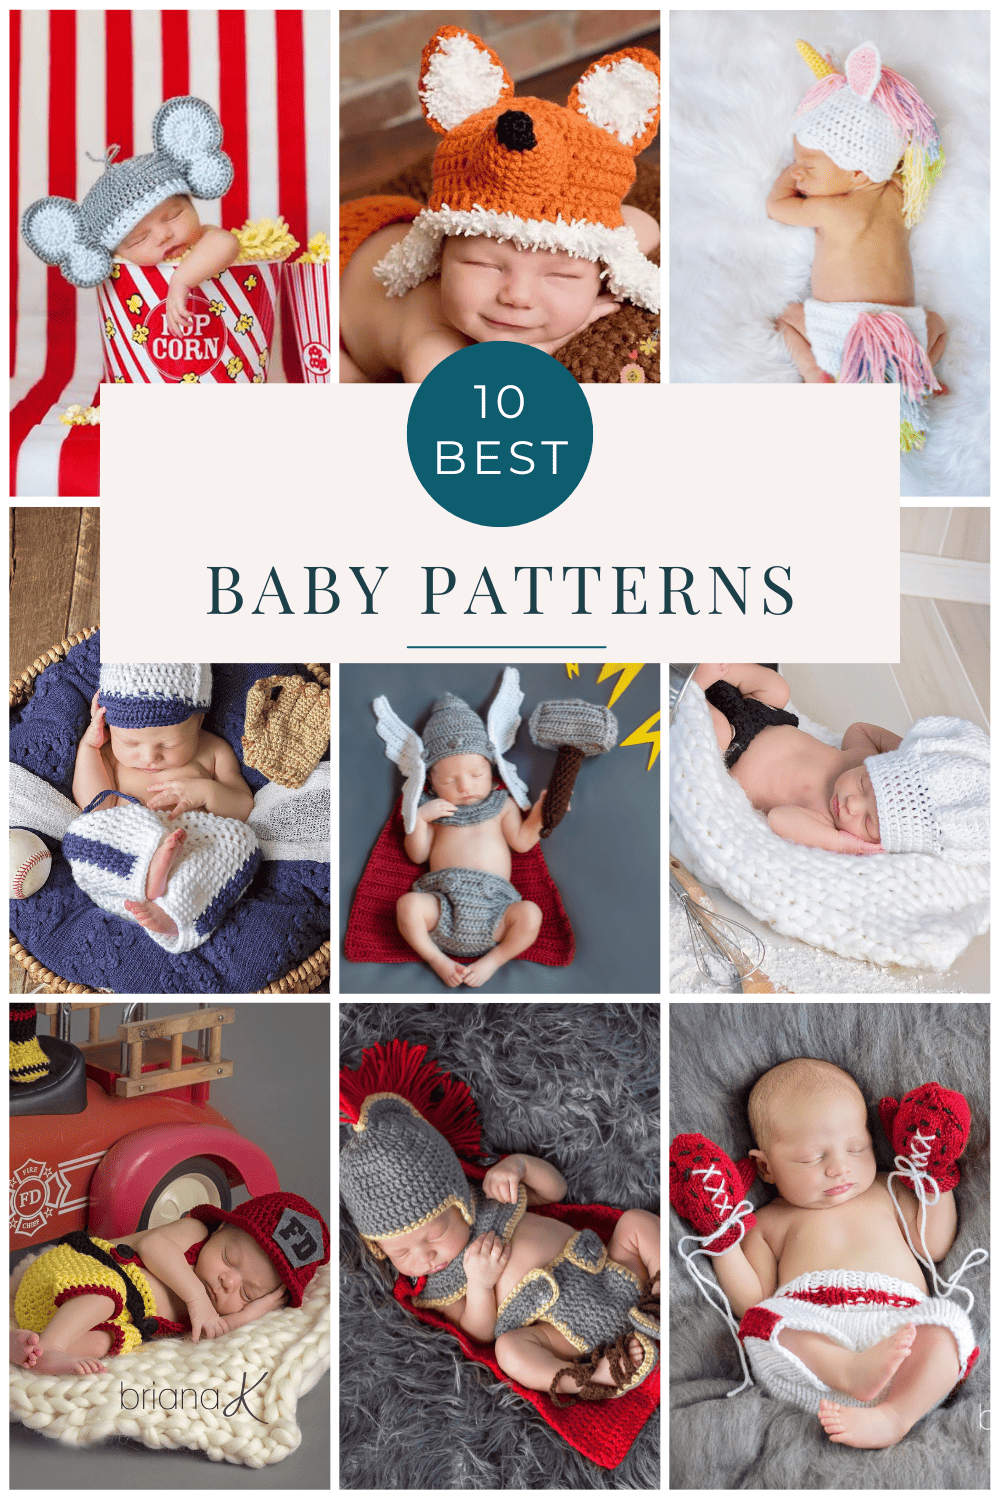 Top 10 Crochet Baby Outfit Patterns